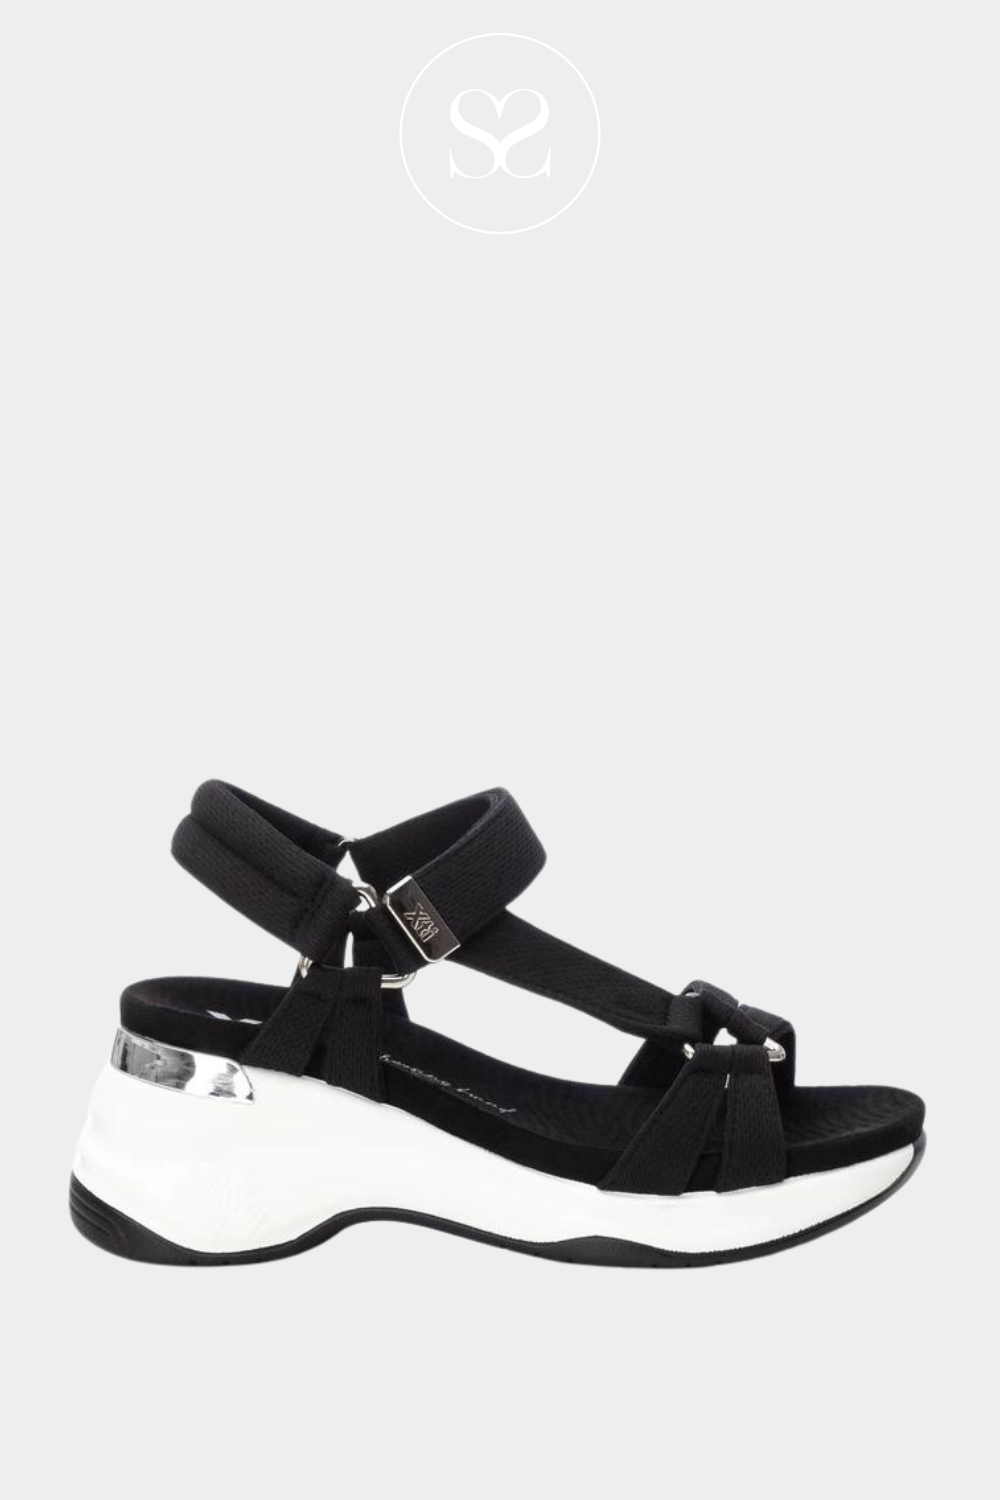 XTI 142623 BLACK WALKING SANDAL WITH A CONTRAST WHITE SOLE AND MIRROR HEEL DETAIL. VELCRO FASTENER 